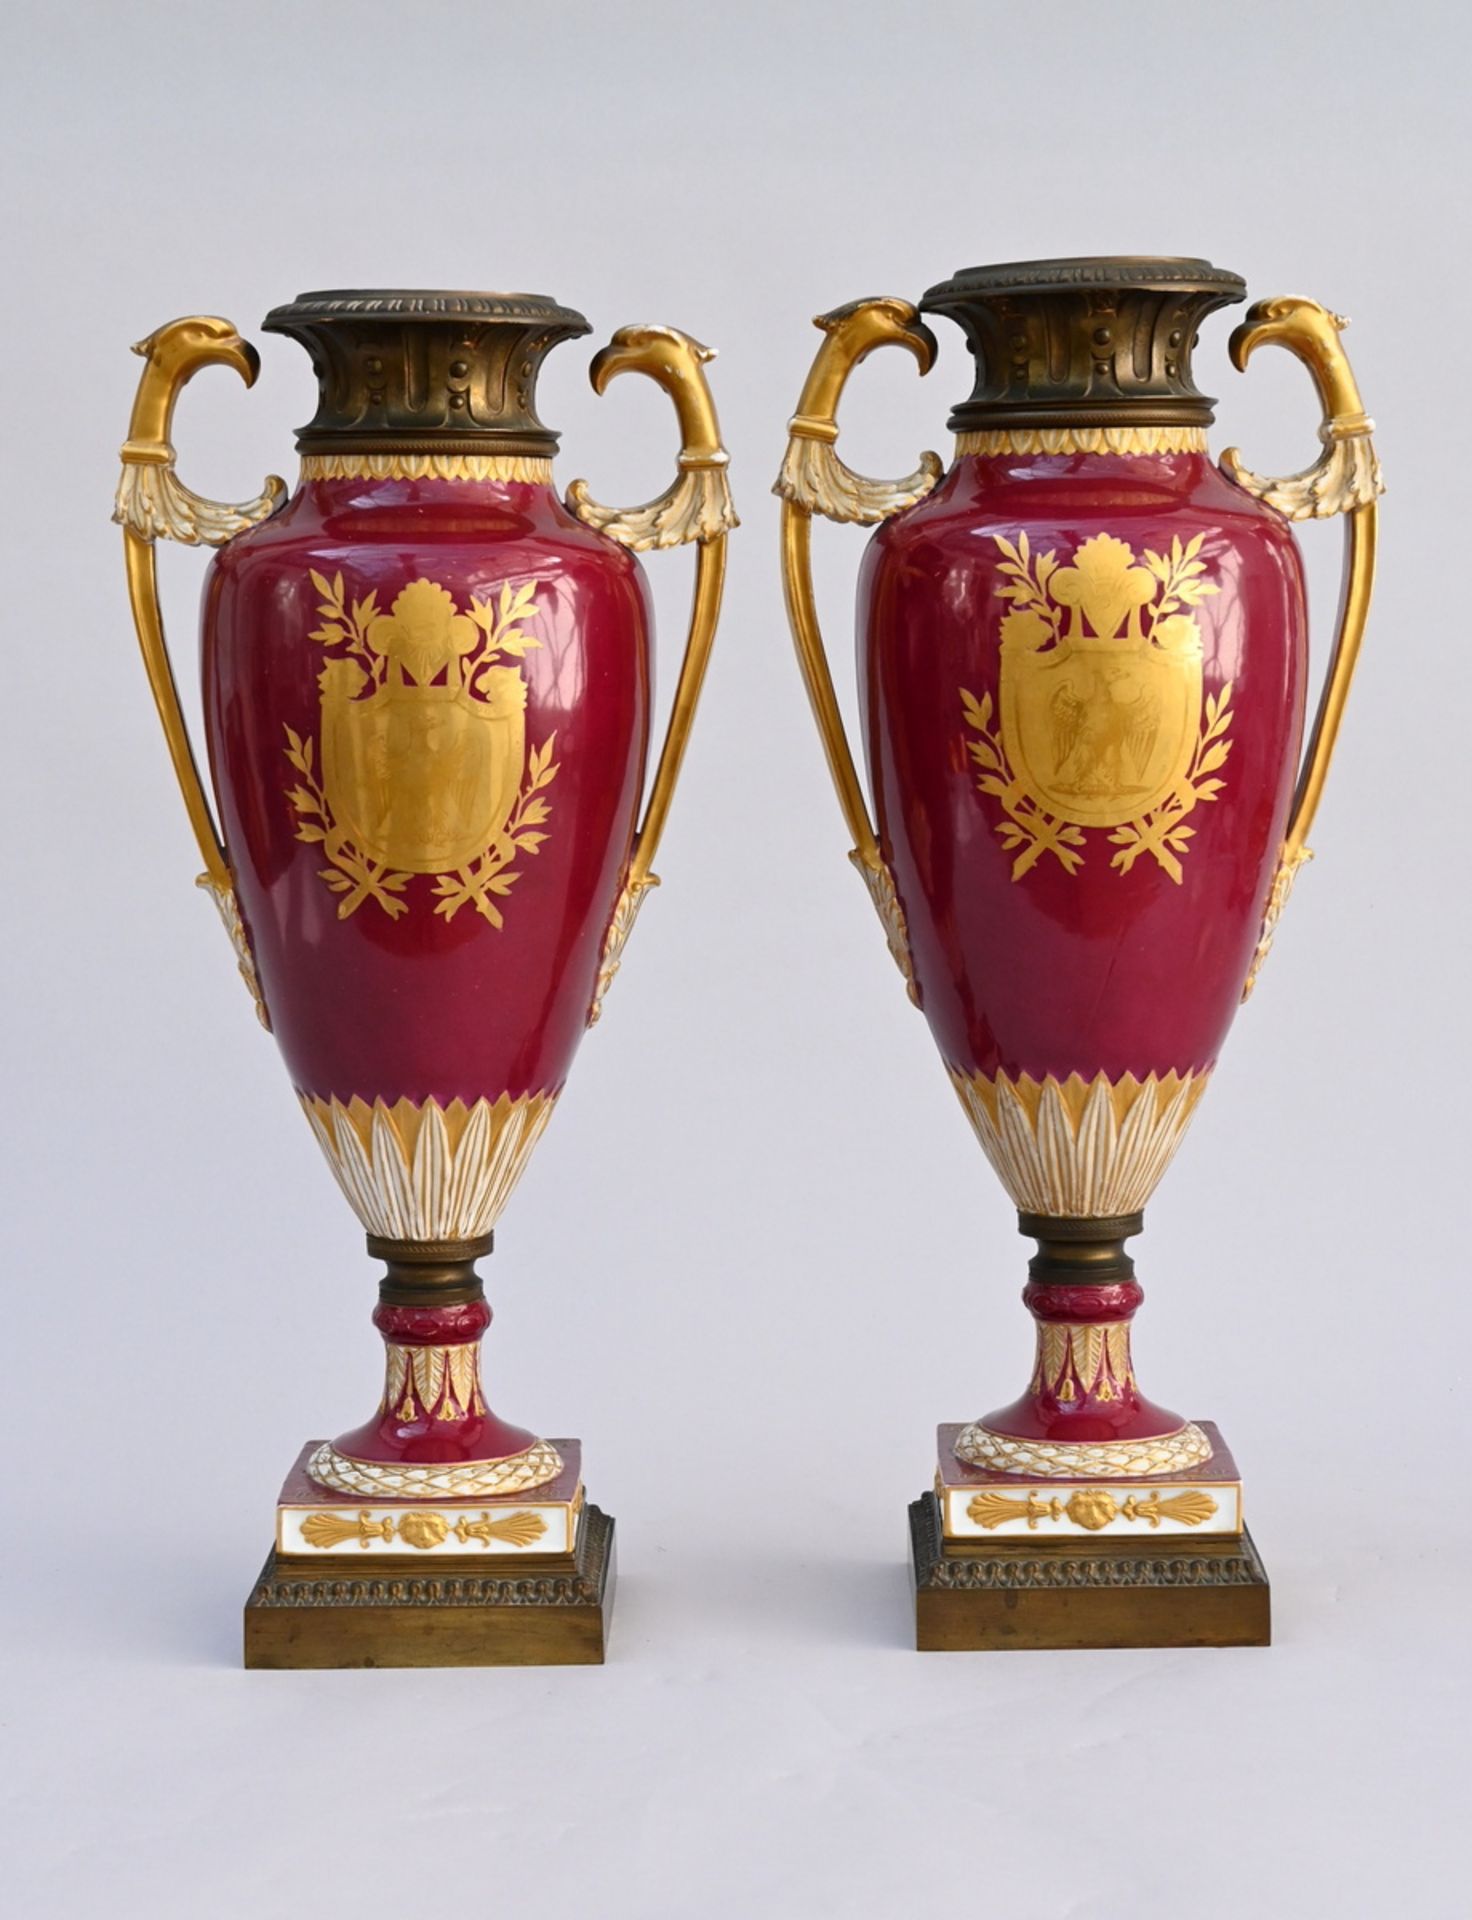 A pair of porcelain vases with bronze fittings 'Napoleon and Josephine', 19th century (h51.5 cm) - Image 2 of 4